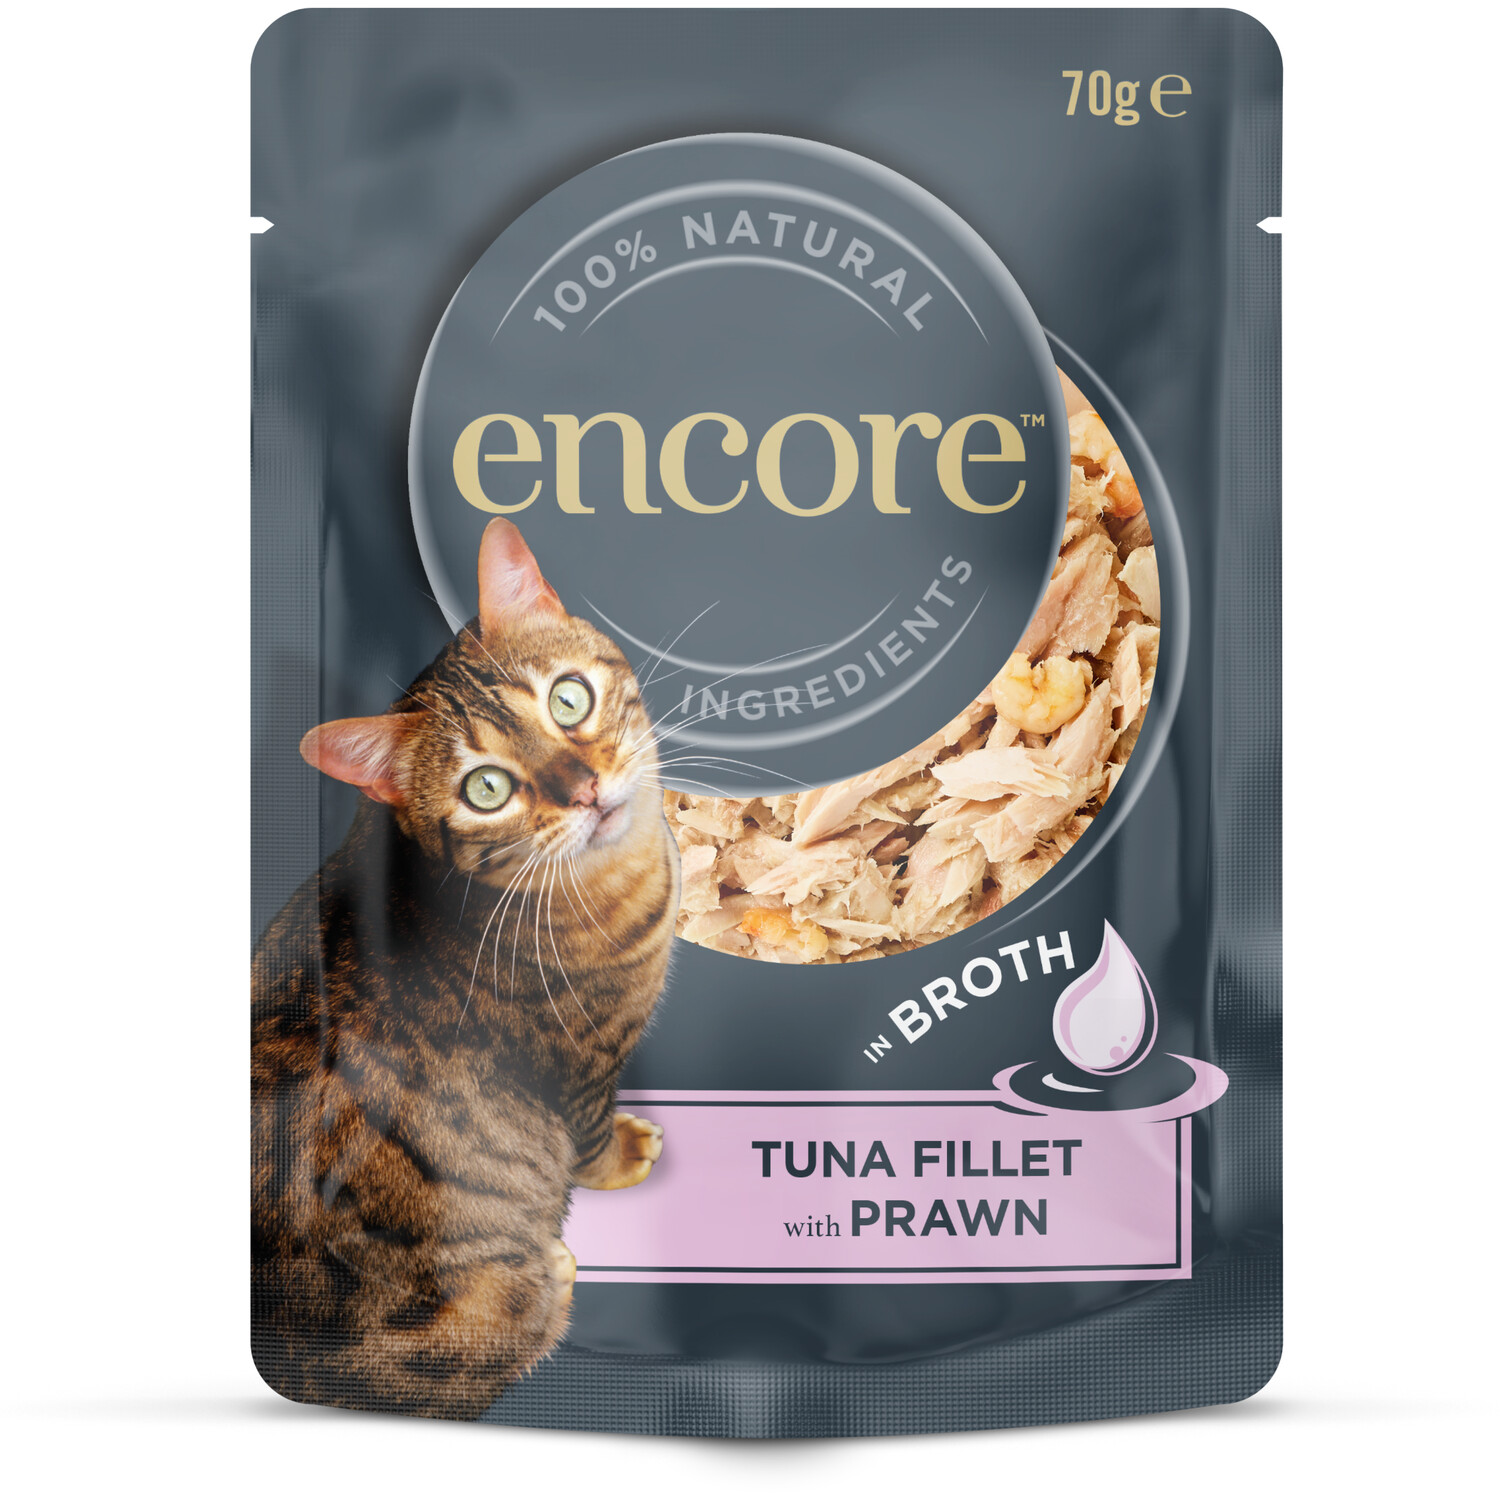 Encore Wet Cat Food in Broth Pouch 70g - Tuna Fillet with Prawn Image 1